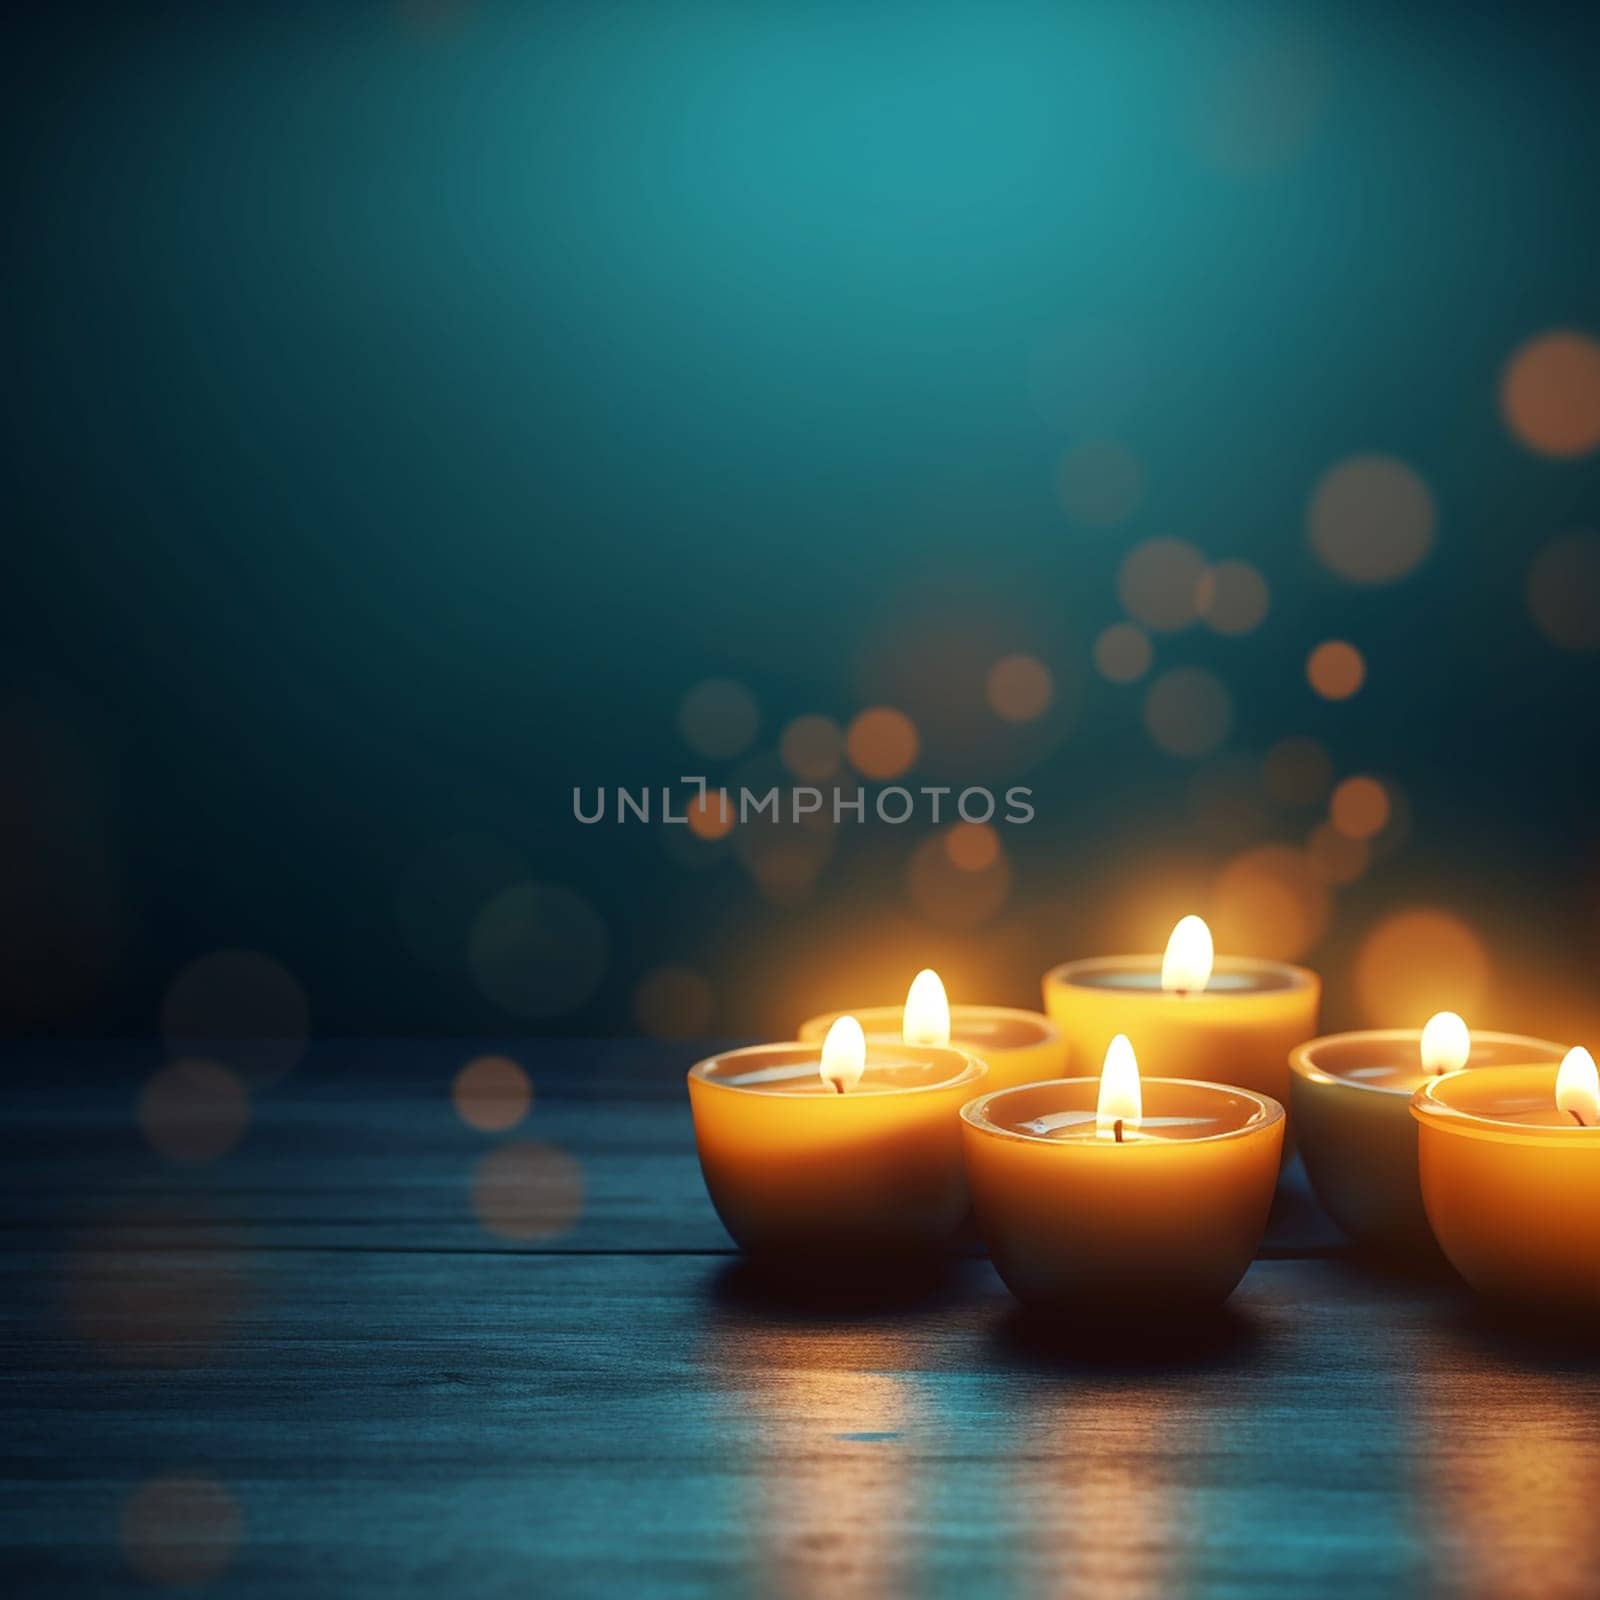 Several lit candles with an atmospheric glow against a dark background. by Hype2art